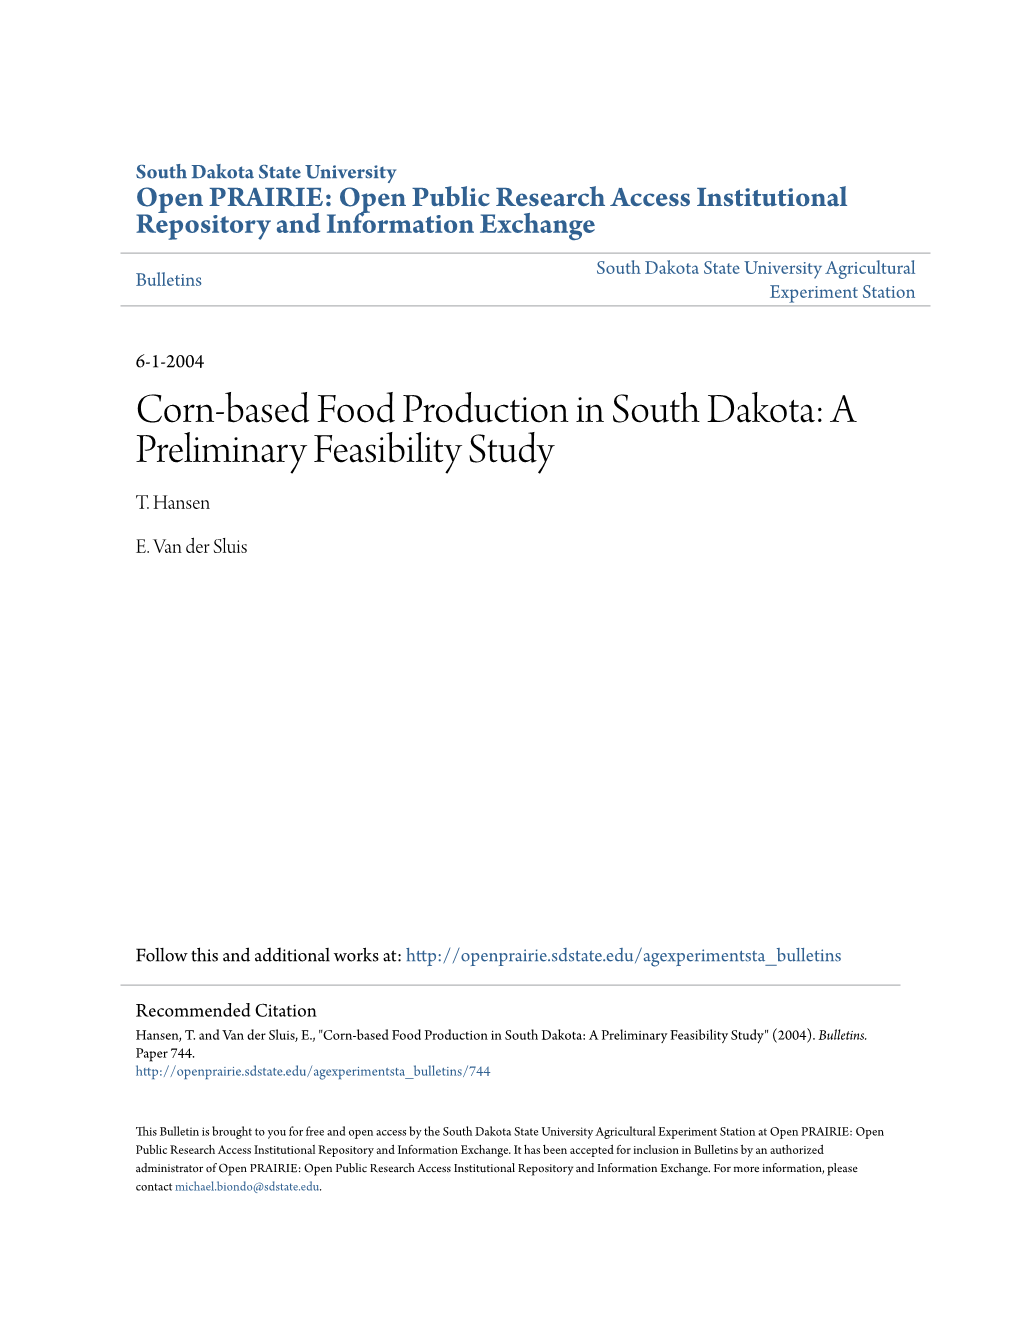 A Preliminary Feasibility Study T